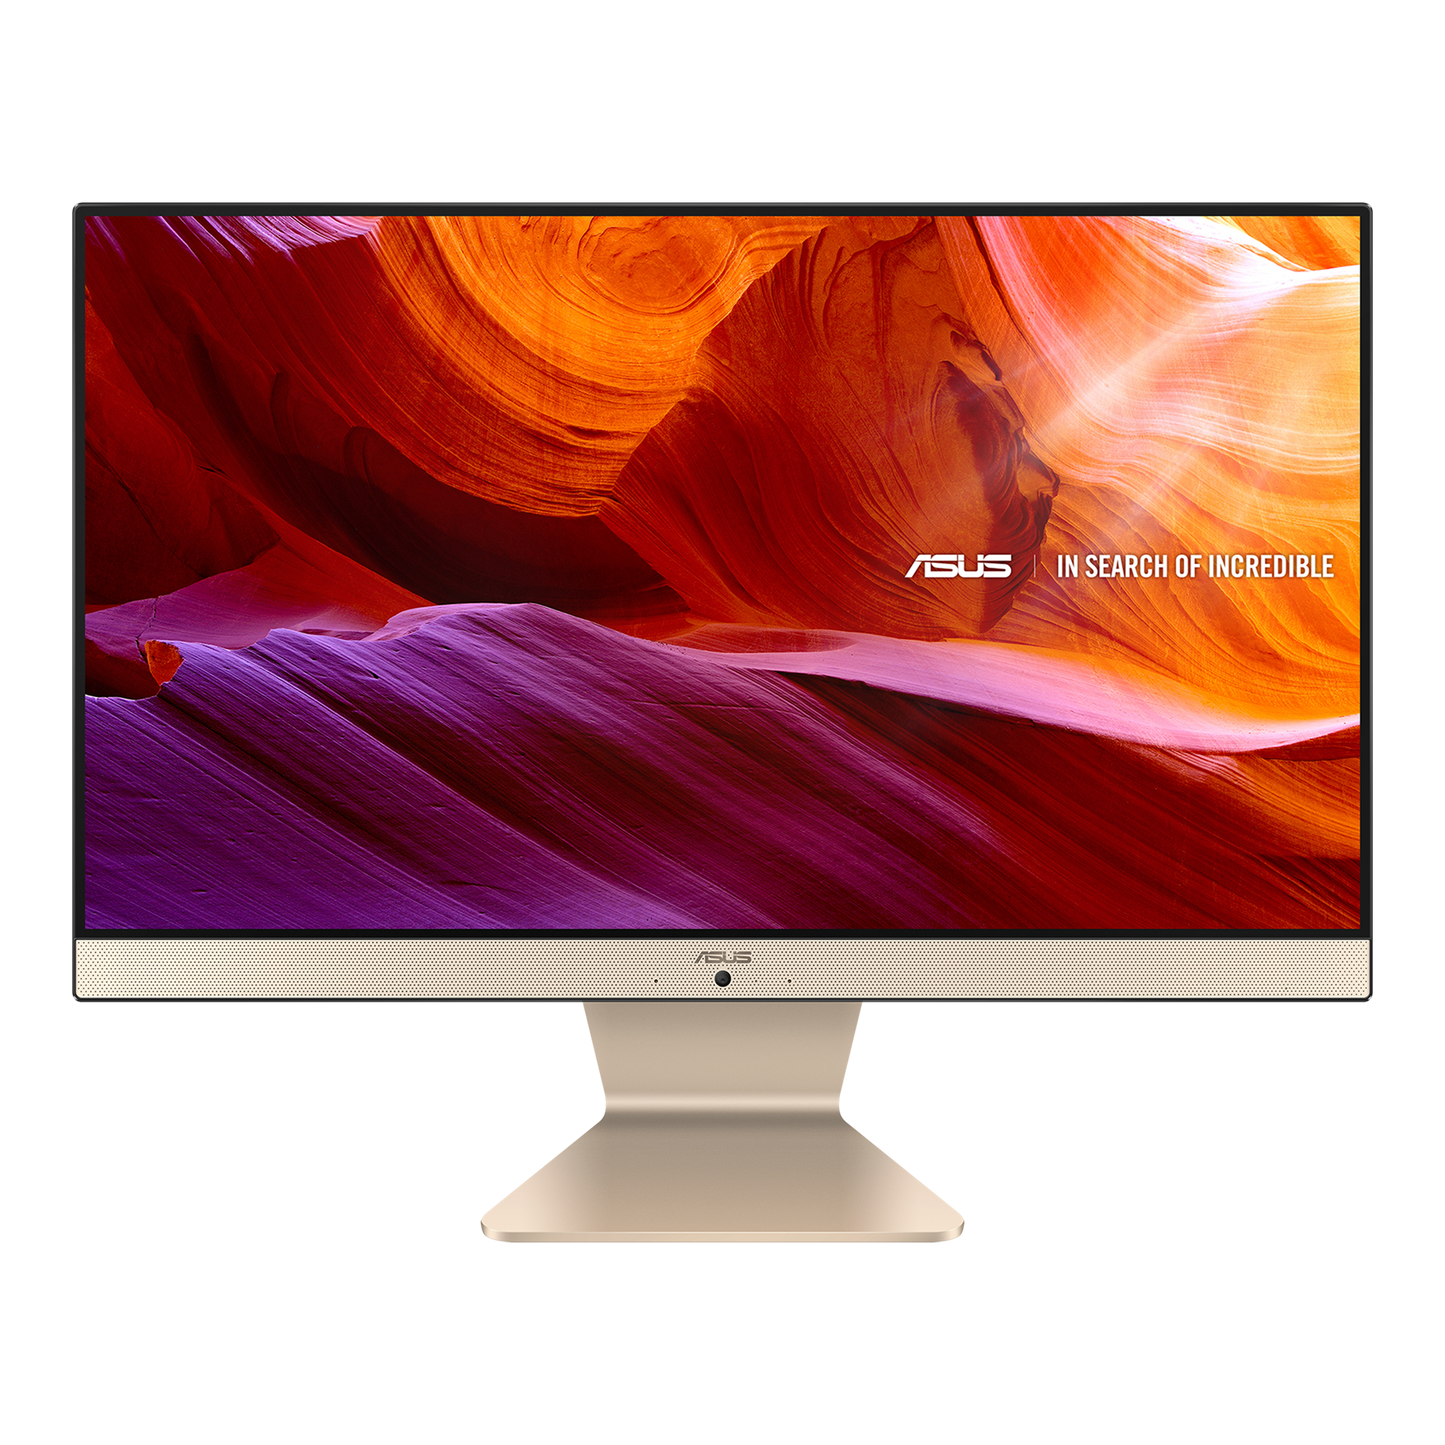 Asus V222FAK VivoAIO 21.5" Full HD non-touch PC, i3-10110U 2.1GHz, 8GB RAM, 1TB HDD, Intel HD graphics, Win 11 Home All In One PC